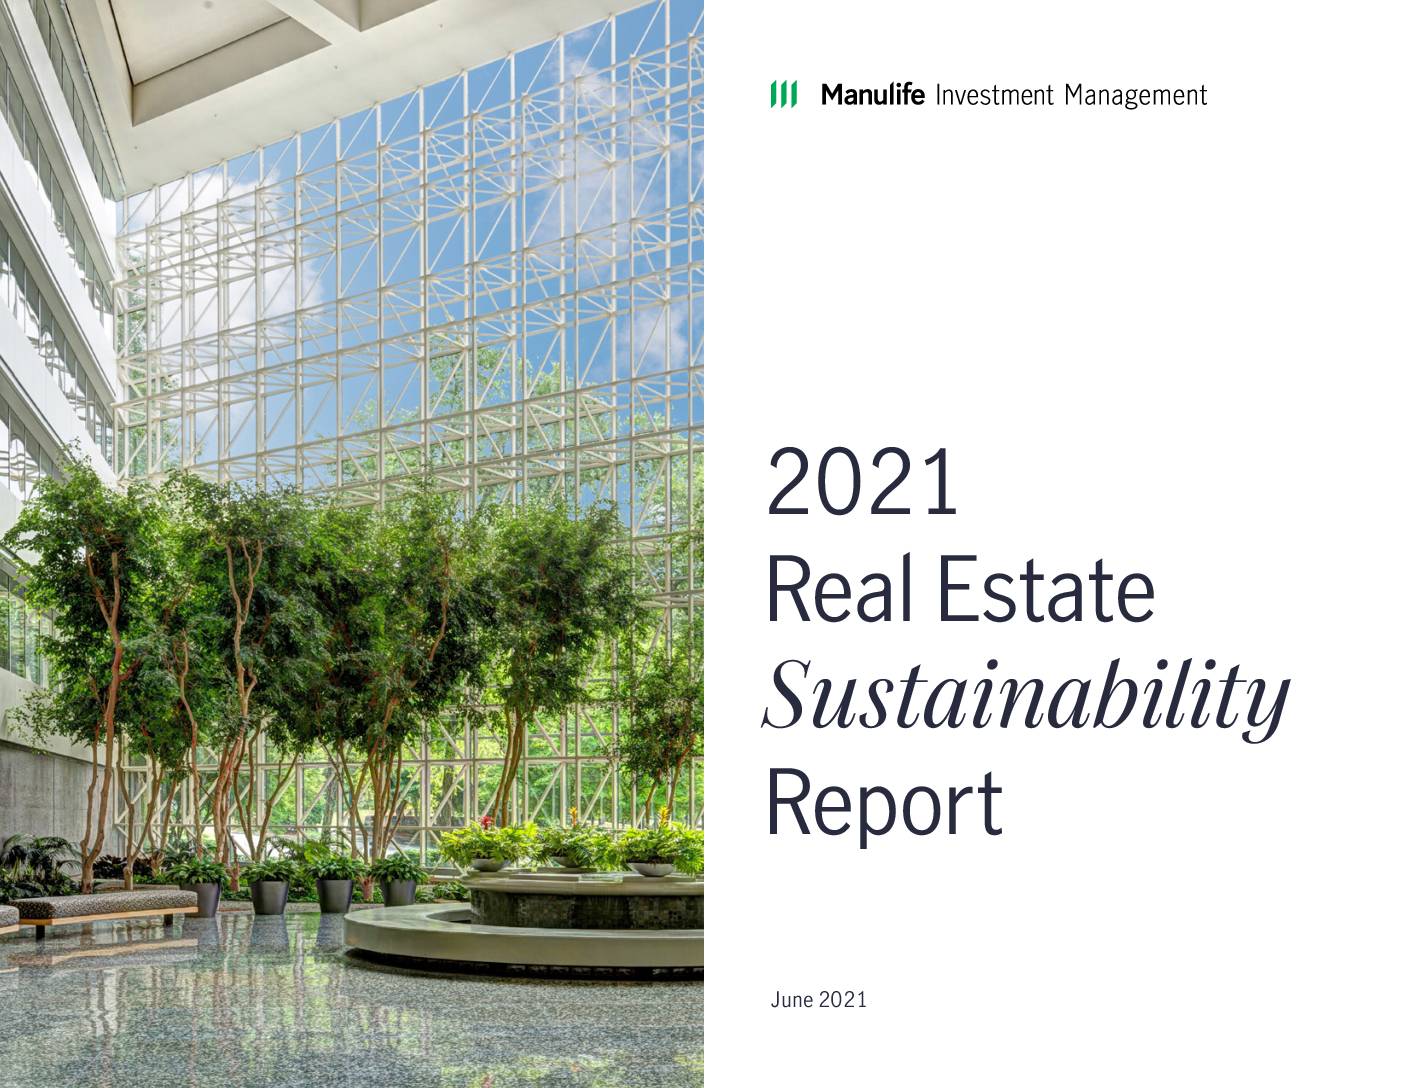 Manulife 2021 Real Estate Sustainability Report